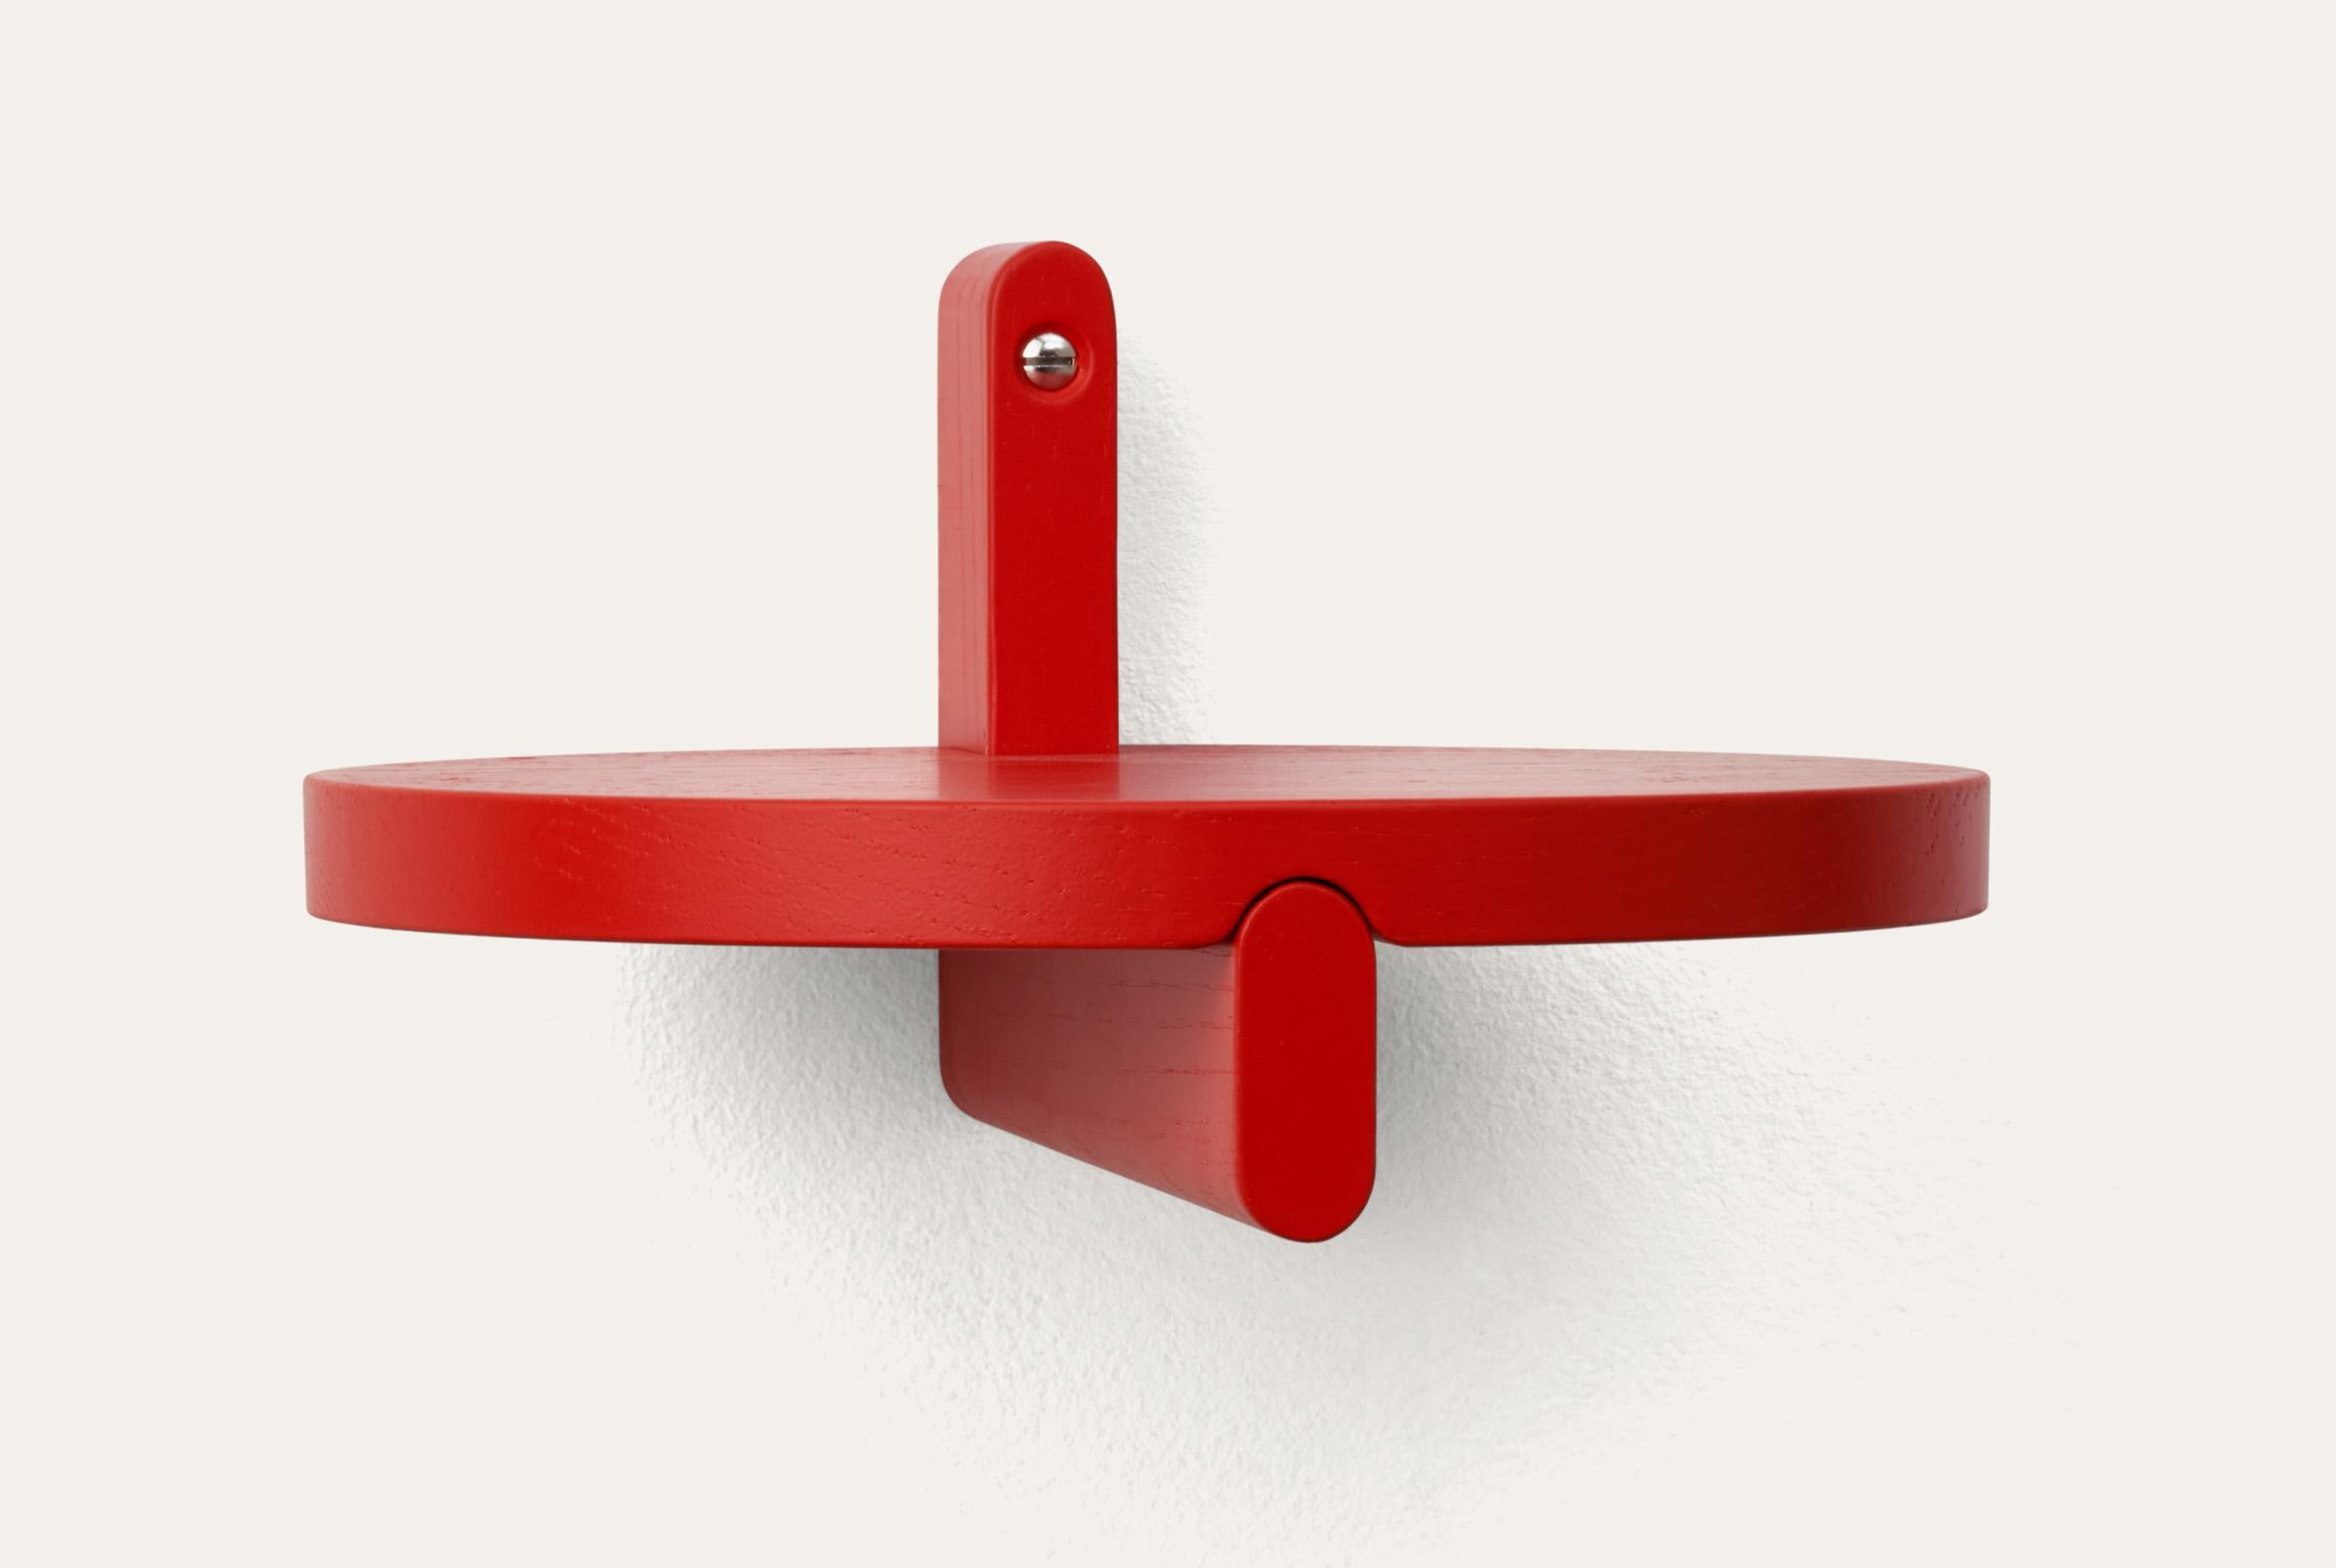 Red Rondelle round shelf by Storängen Design
Dimensions: D 25 x H 14 cm
Materials: oak wood.
Available in other colors and with or without steel hanger.

Rondelle can be a shelf or a small table depending on your needs. It shares the same